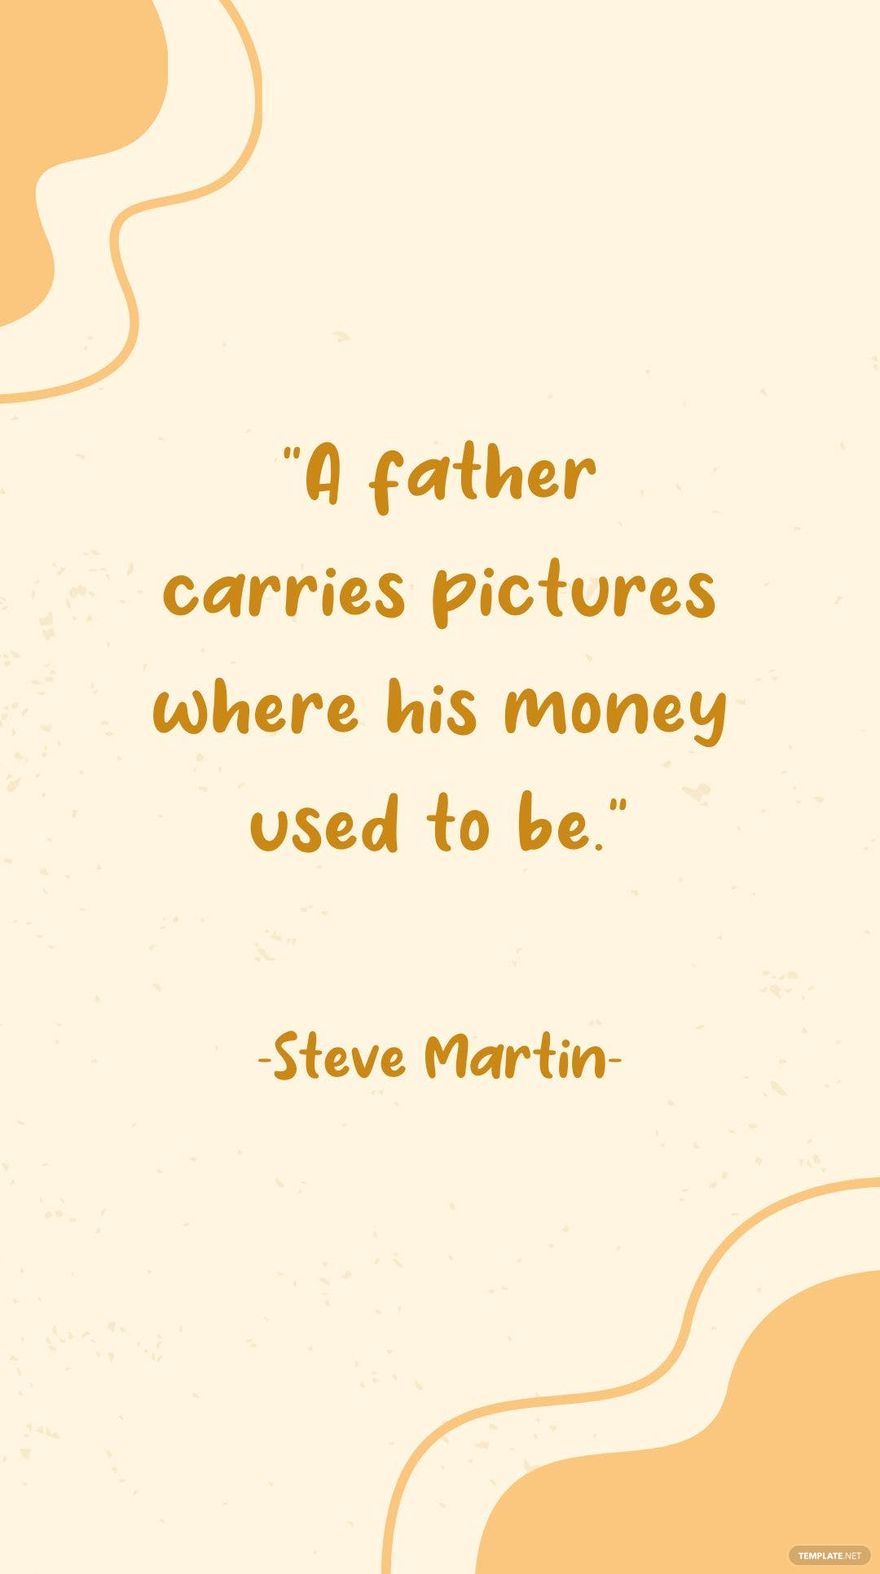 Steve Martin - A father carries pictures where his money used to be.